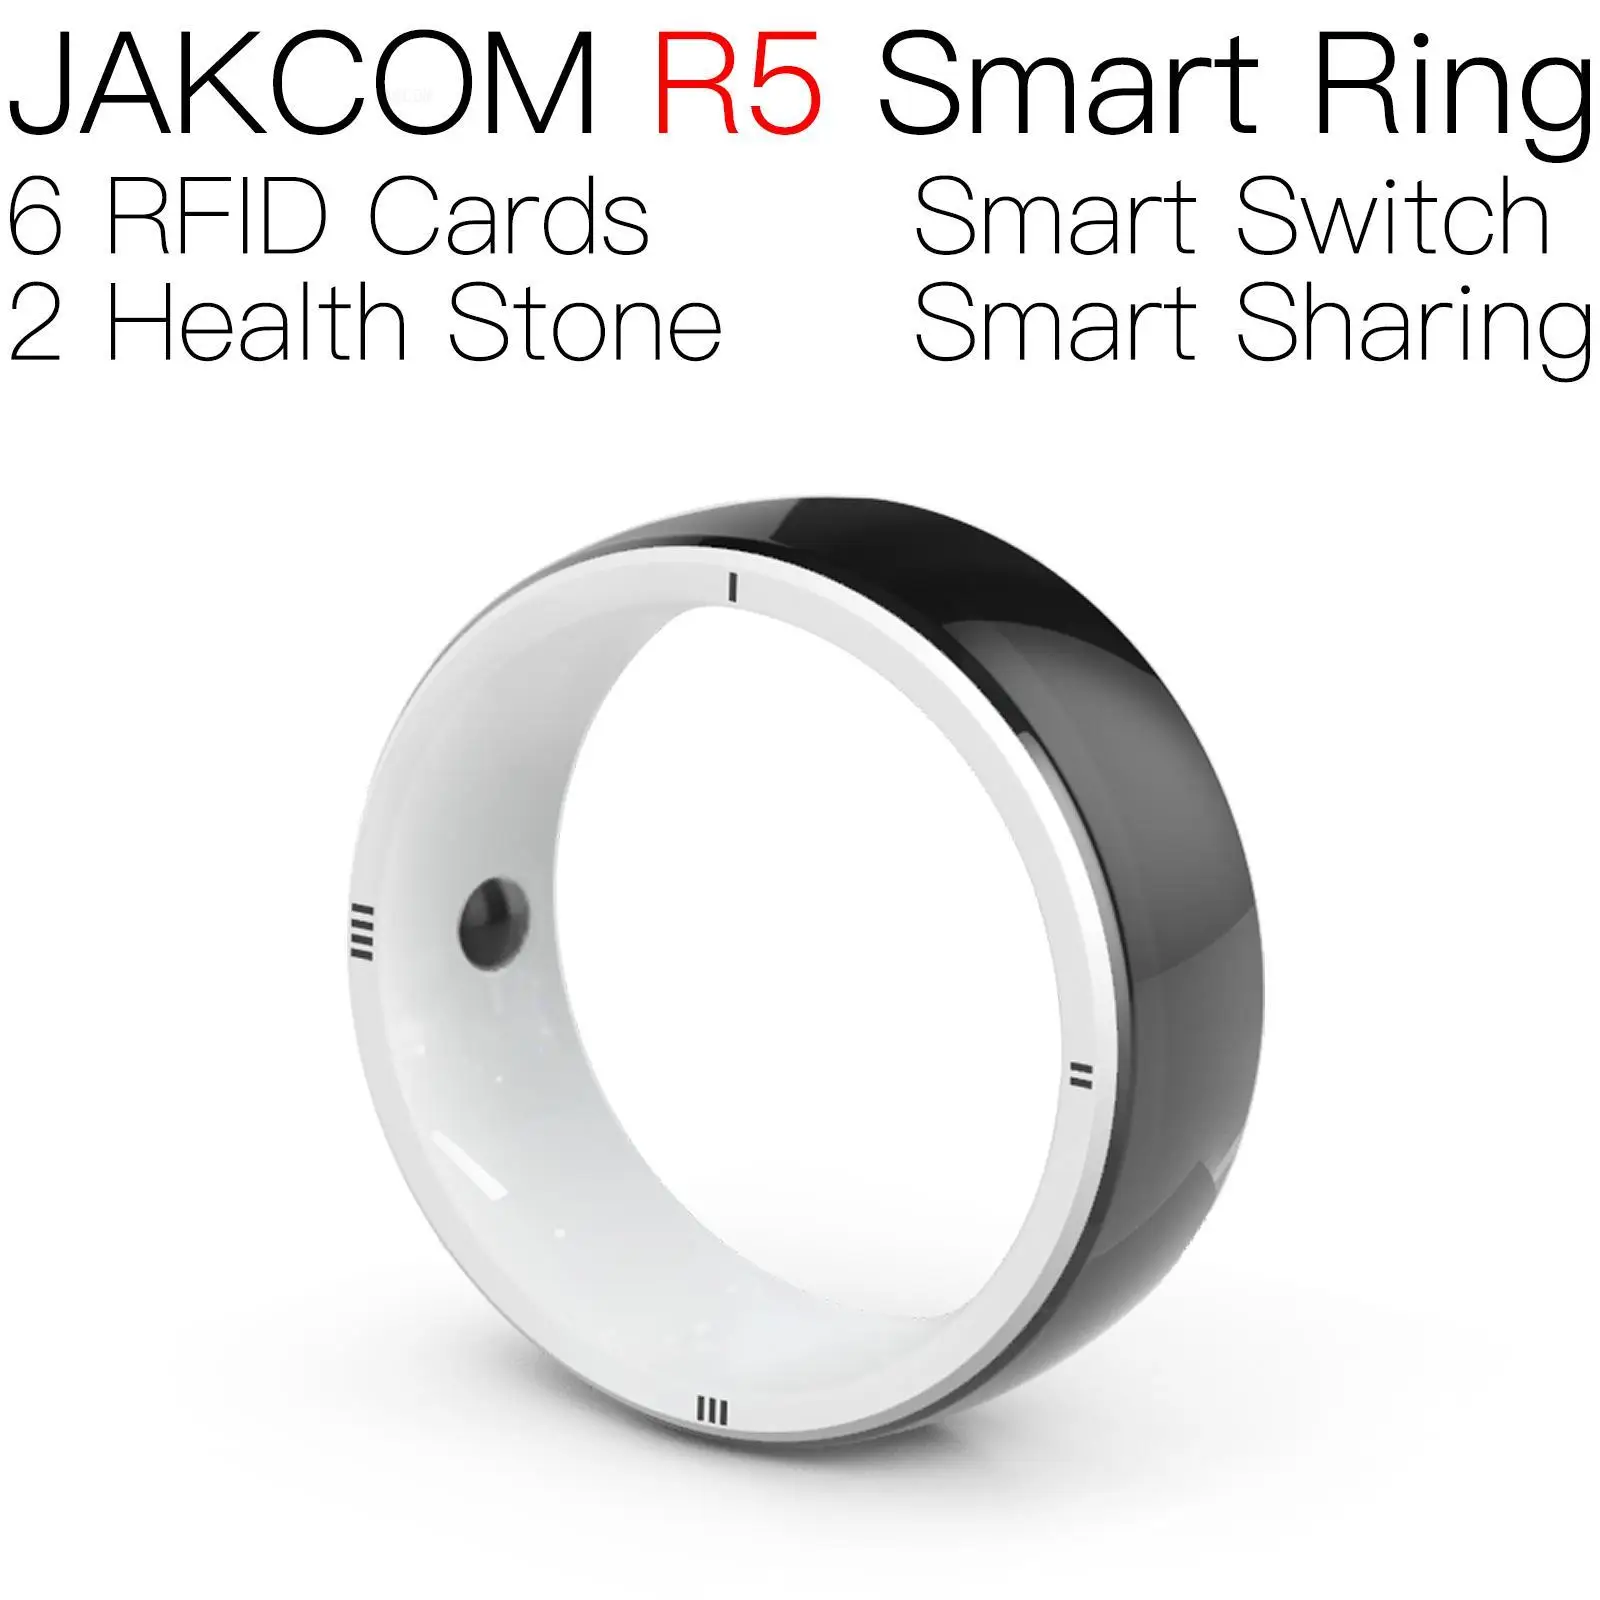 

JAKCOM R5 Smart Ring better than prodecoder nfc module for payphone dual chip uid changable metal tag label transponder rfid